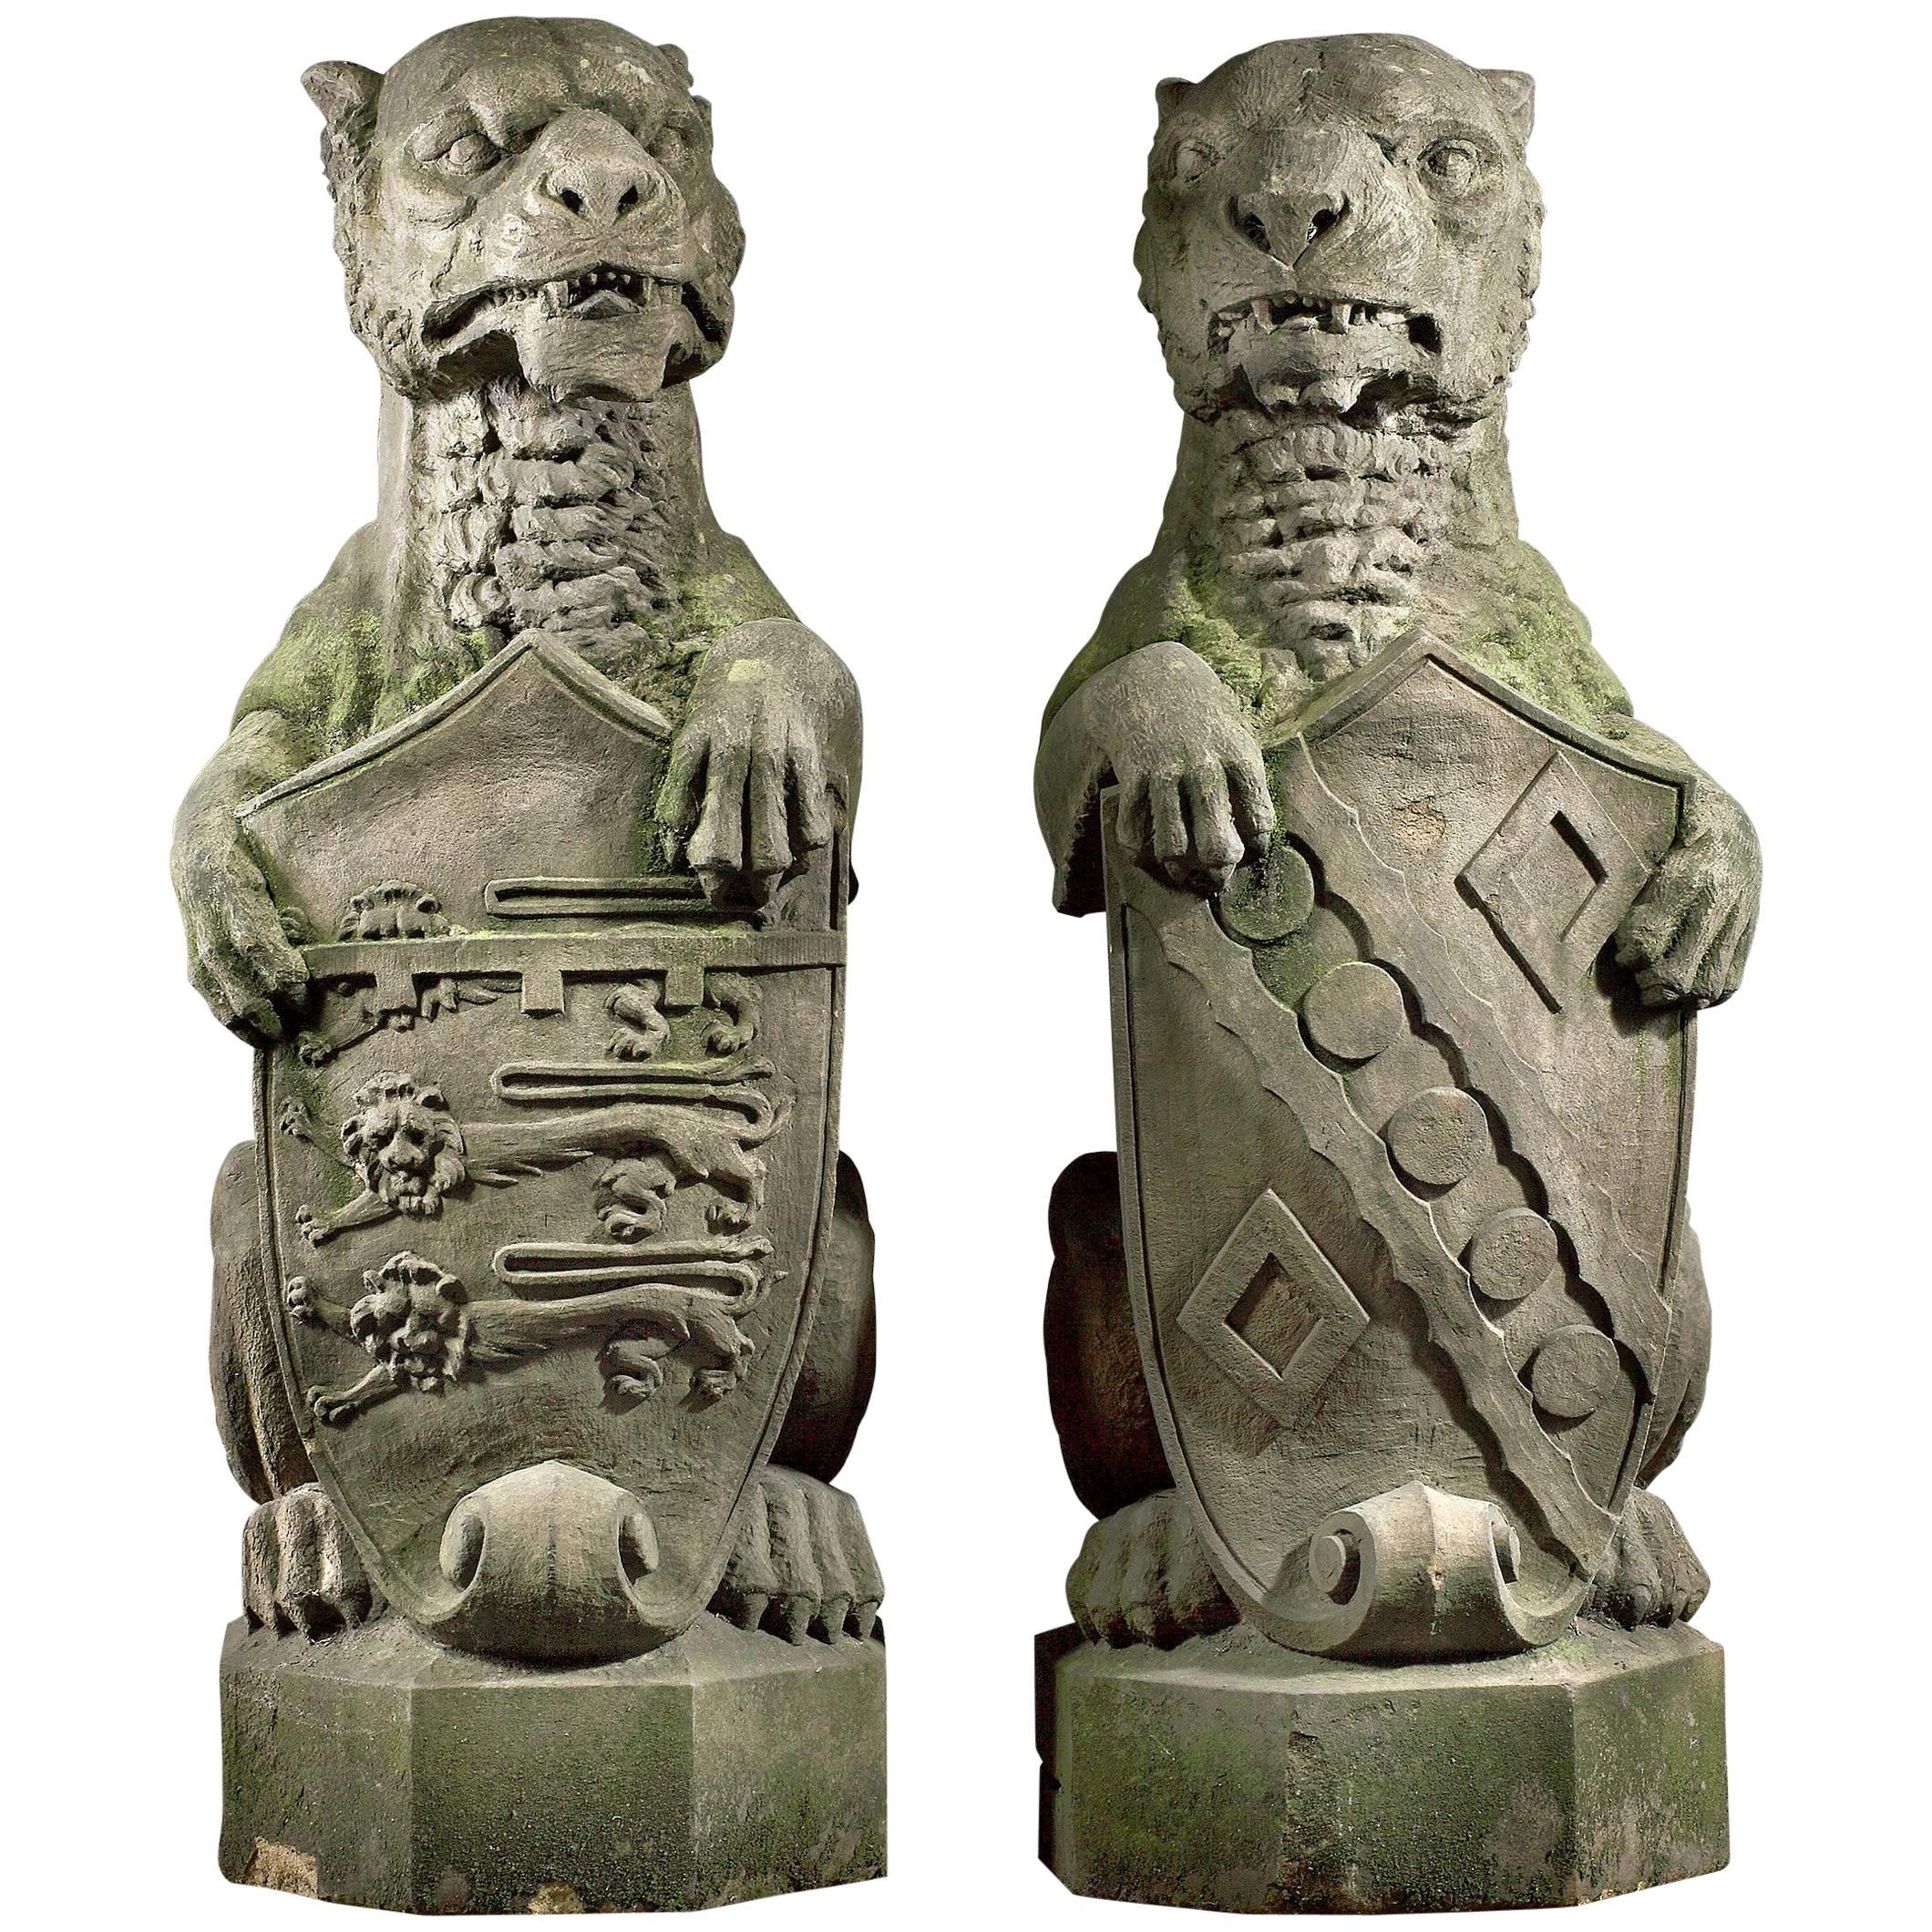 19th Century English Finials Carved as Heraldic Lions